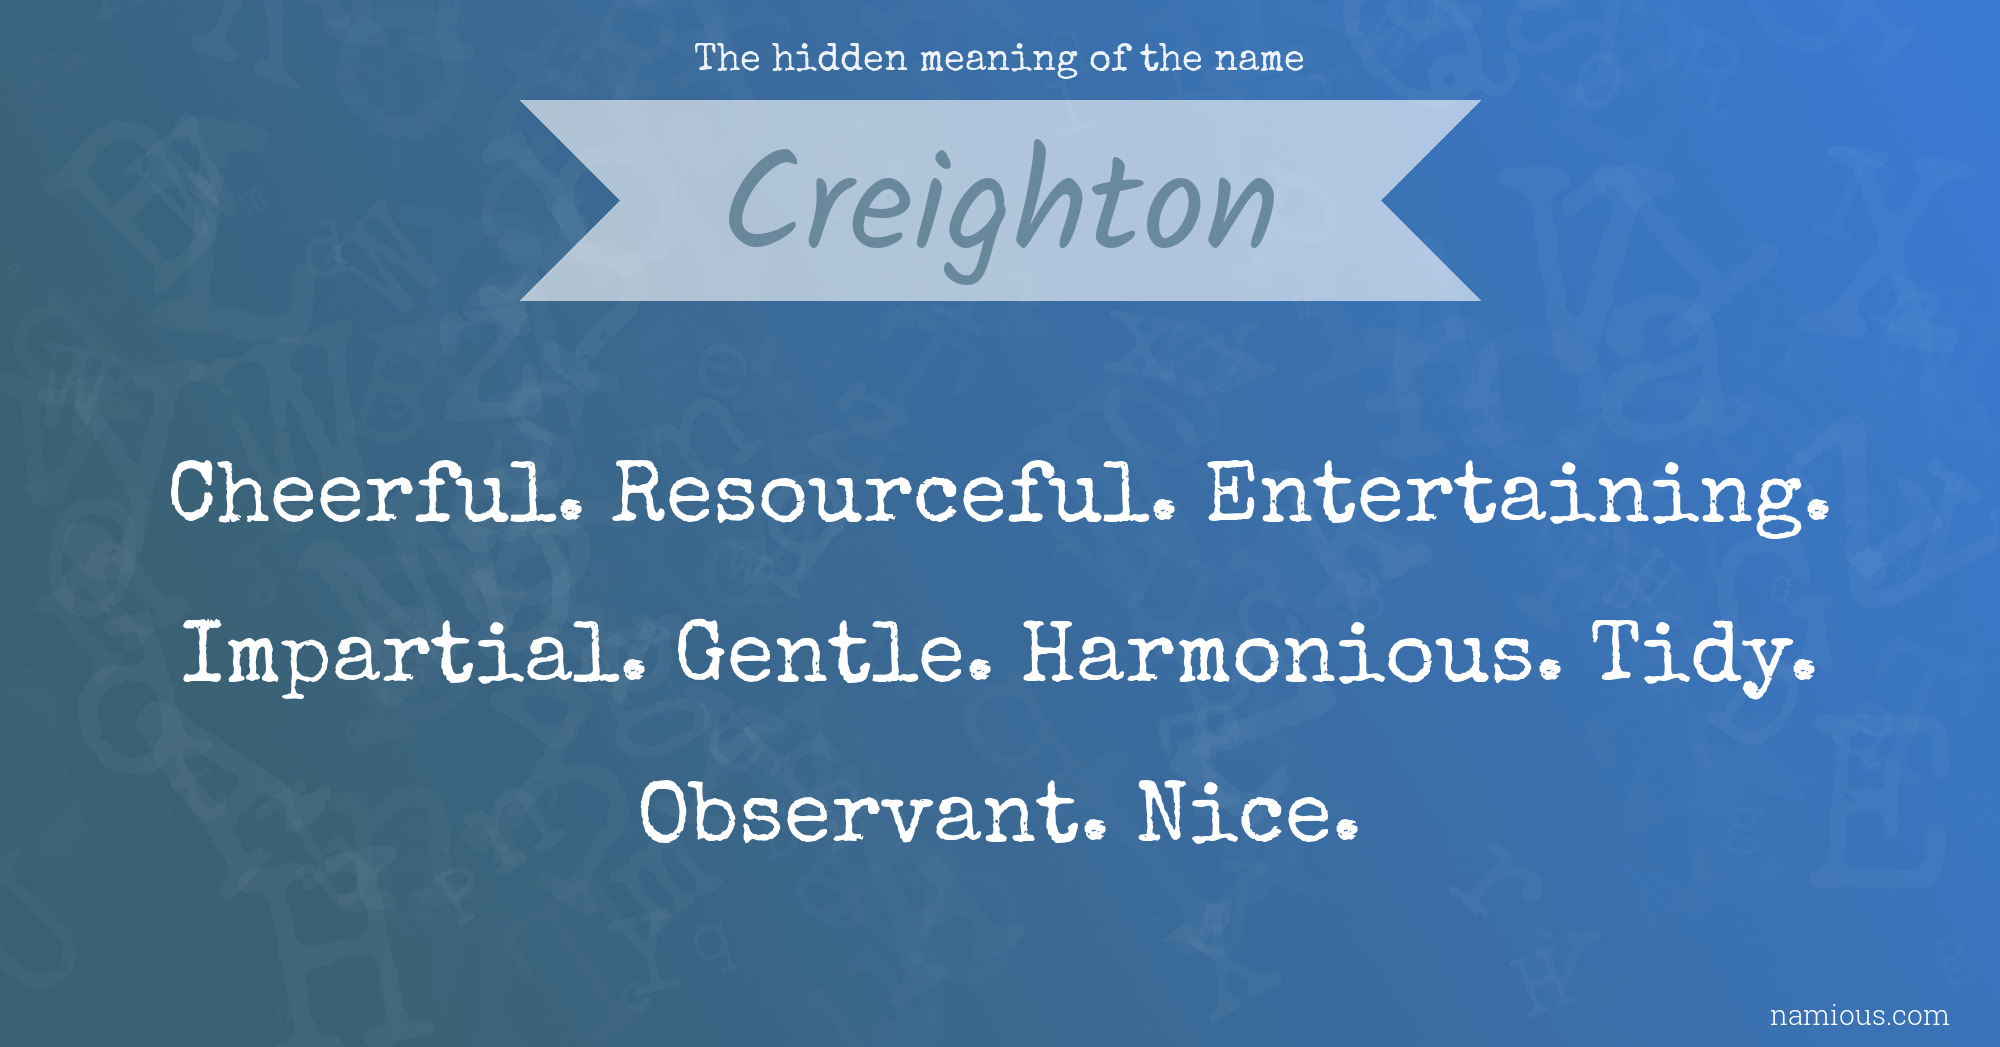 The hidden meaning of the name Creighton